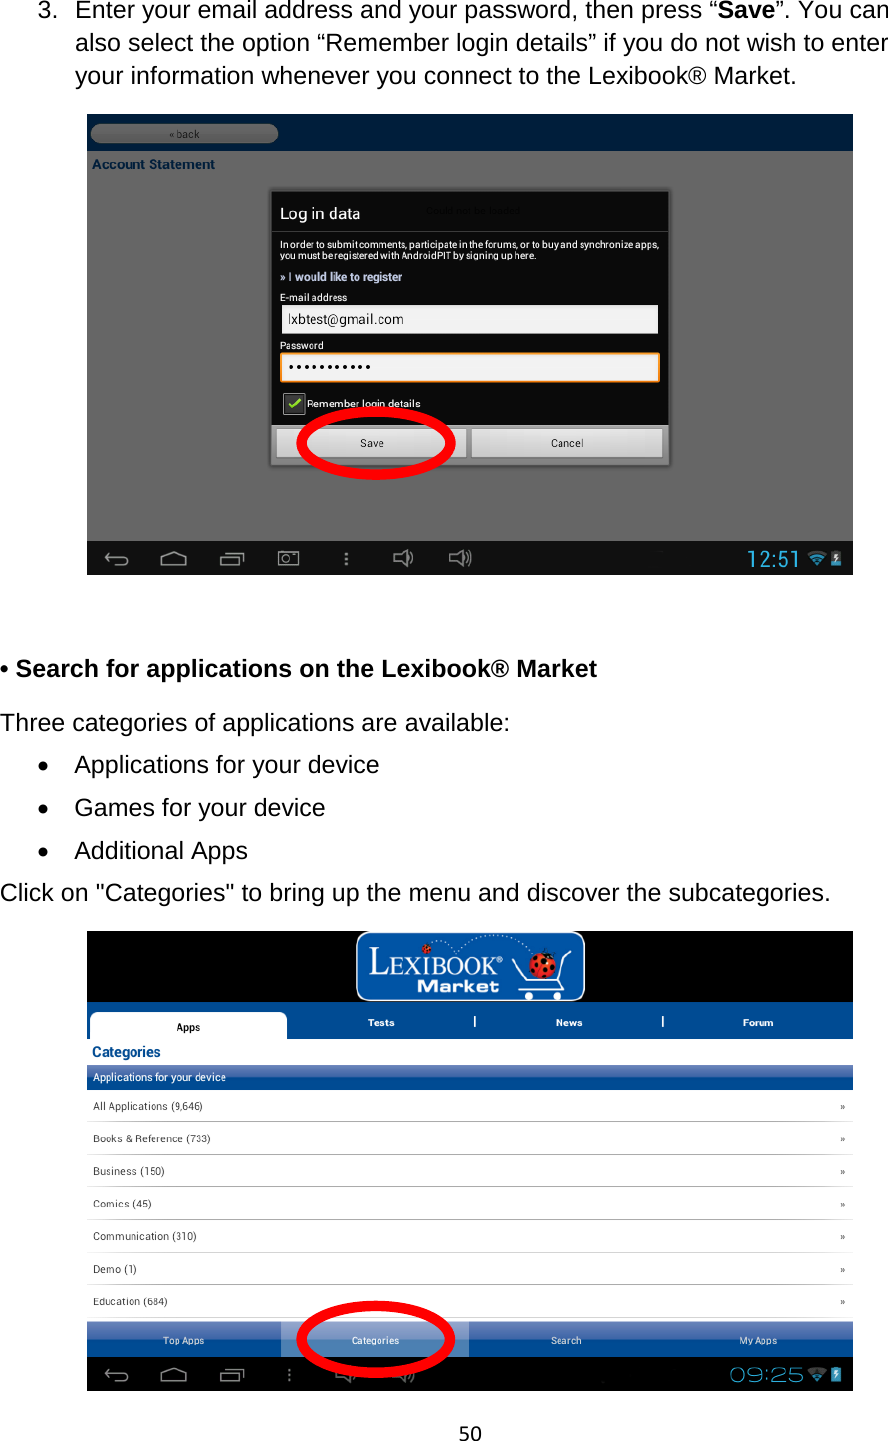 50  3. Enter your email address and your password, then press “Save”. You can also select the option “Remember login details” if you do not wish to enter your information whenever you connect to the Lexibook® Market.    • Search for applications on the Lexibook® Market Three categories of applications are available: • Applications for your device • Games for your device • Additional Apps Click on &quot;Categories&quot; to bring up the menu and discover the subcategories.  